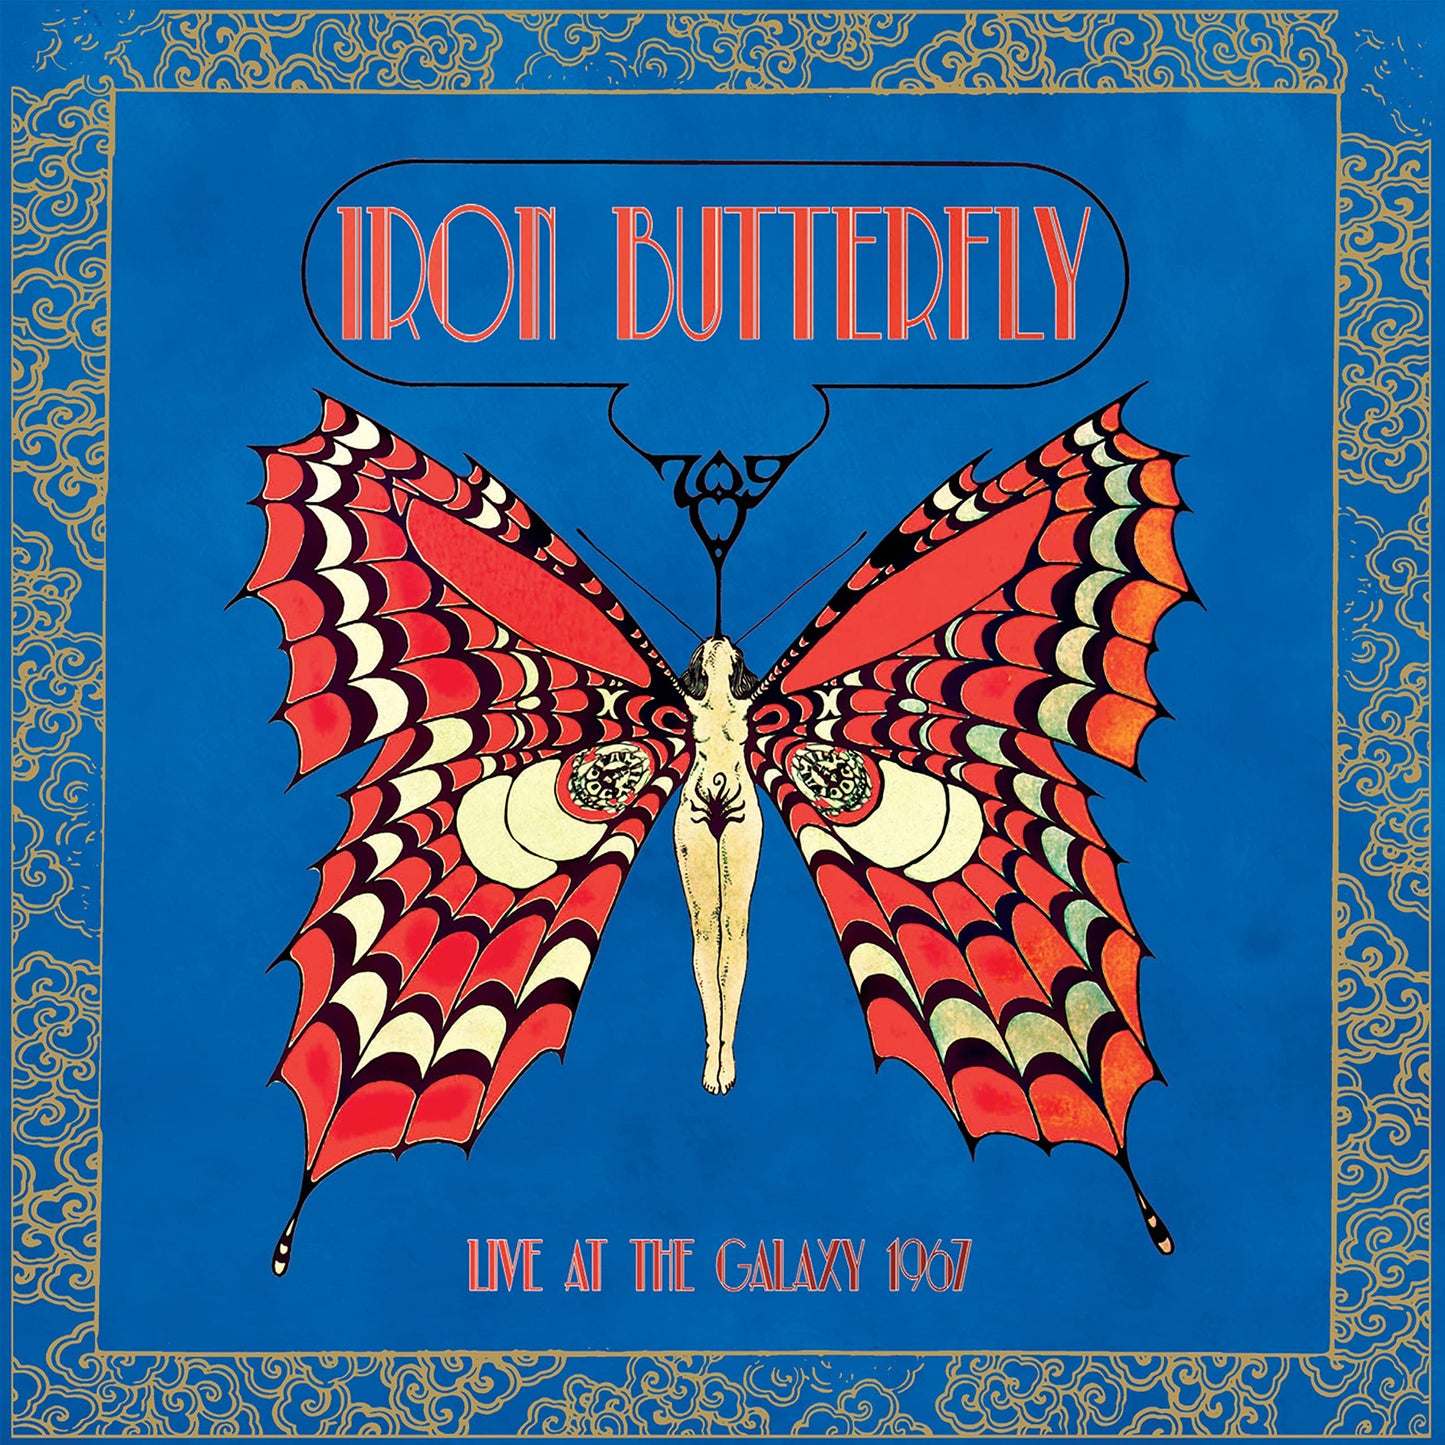 Iron Butterfly - Live At The Galaxy 1967 - Import CD Digipack